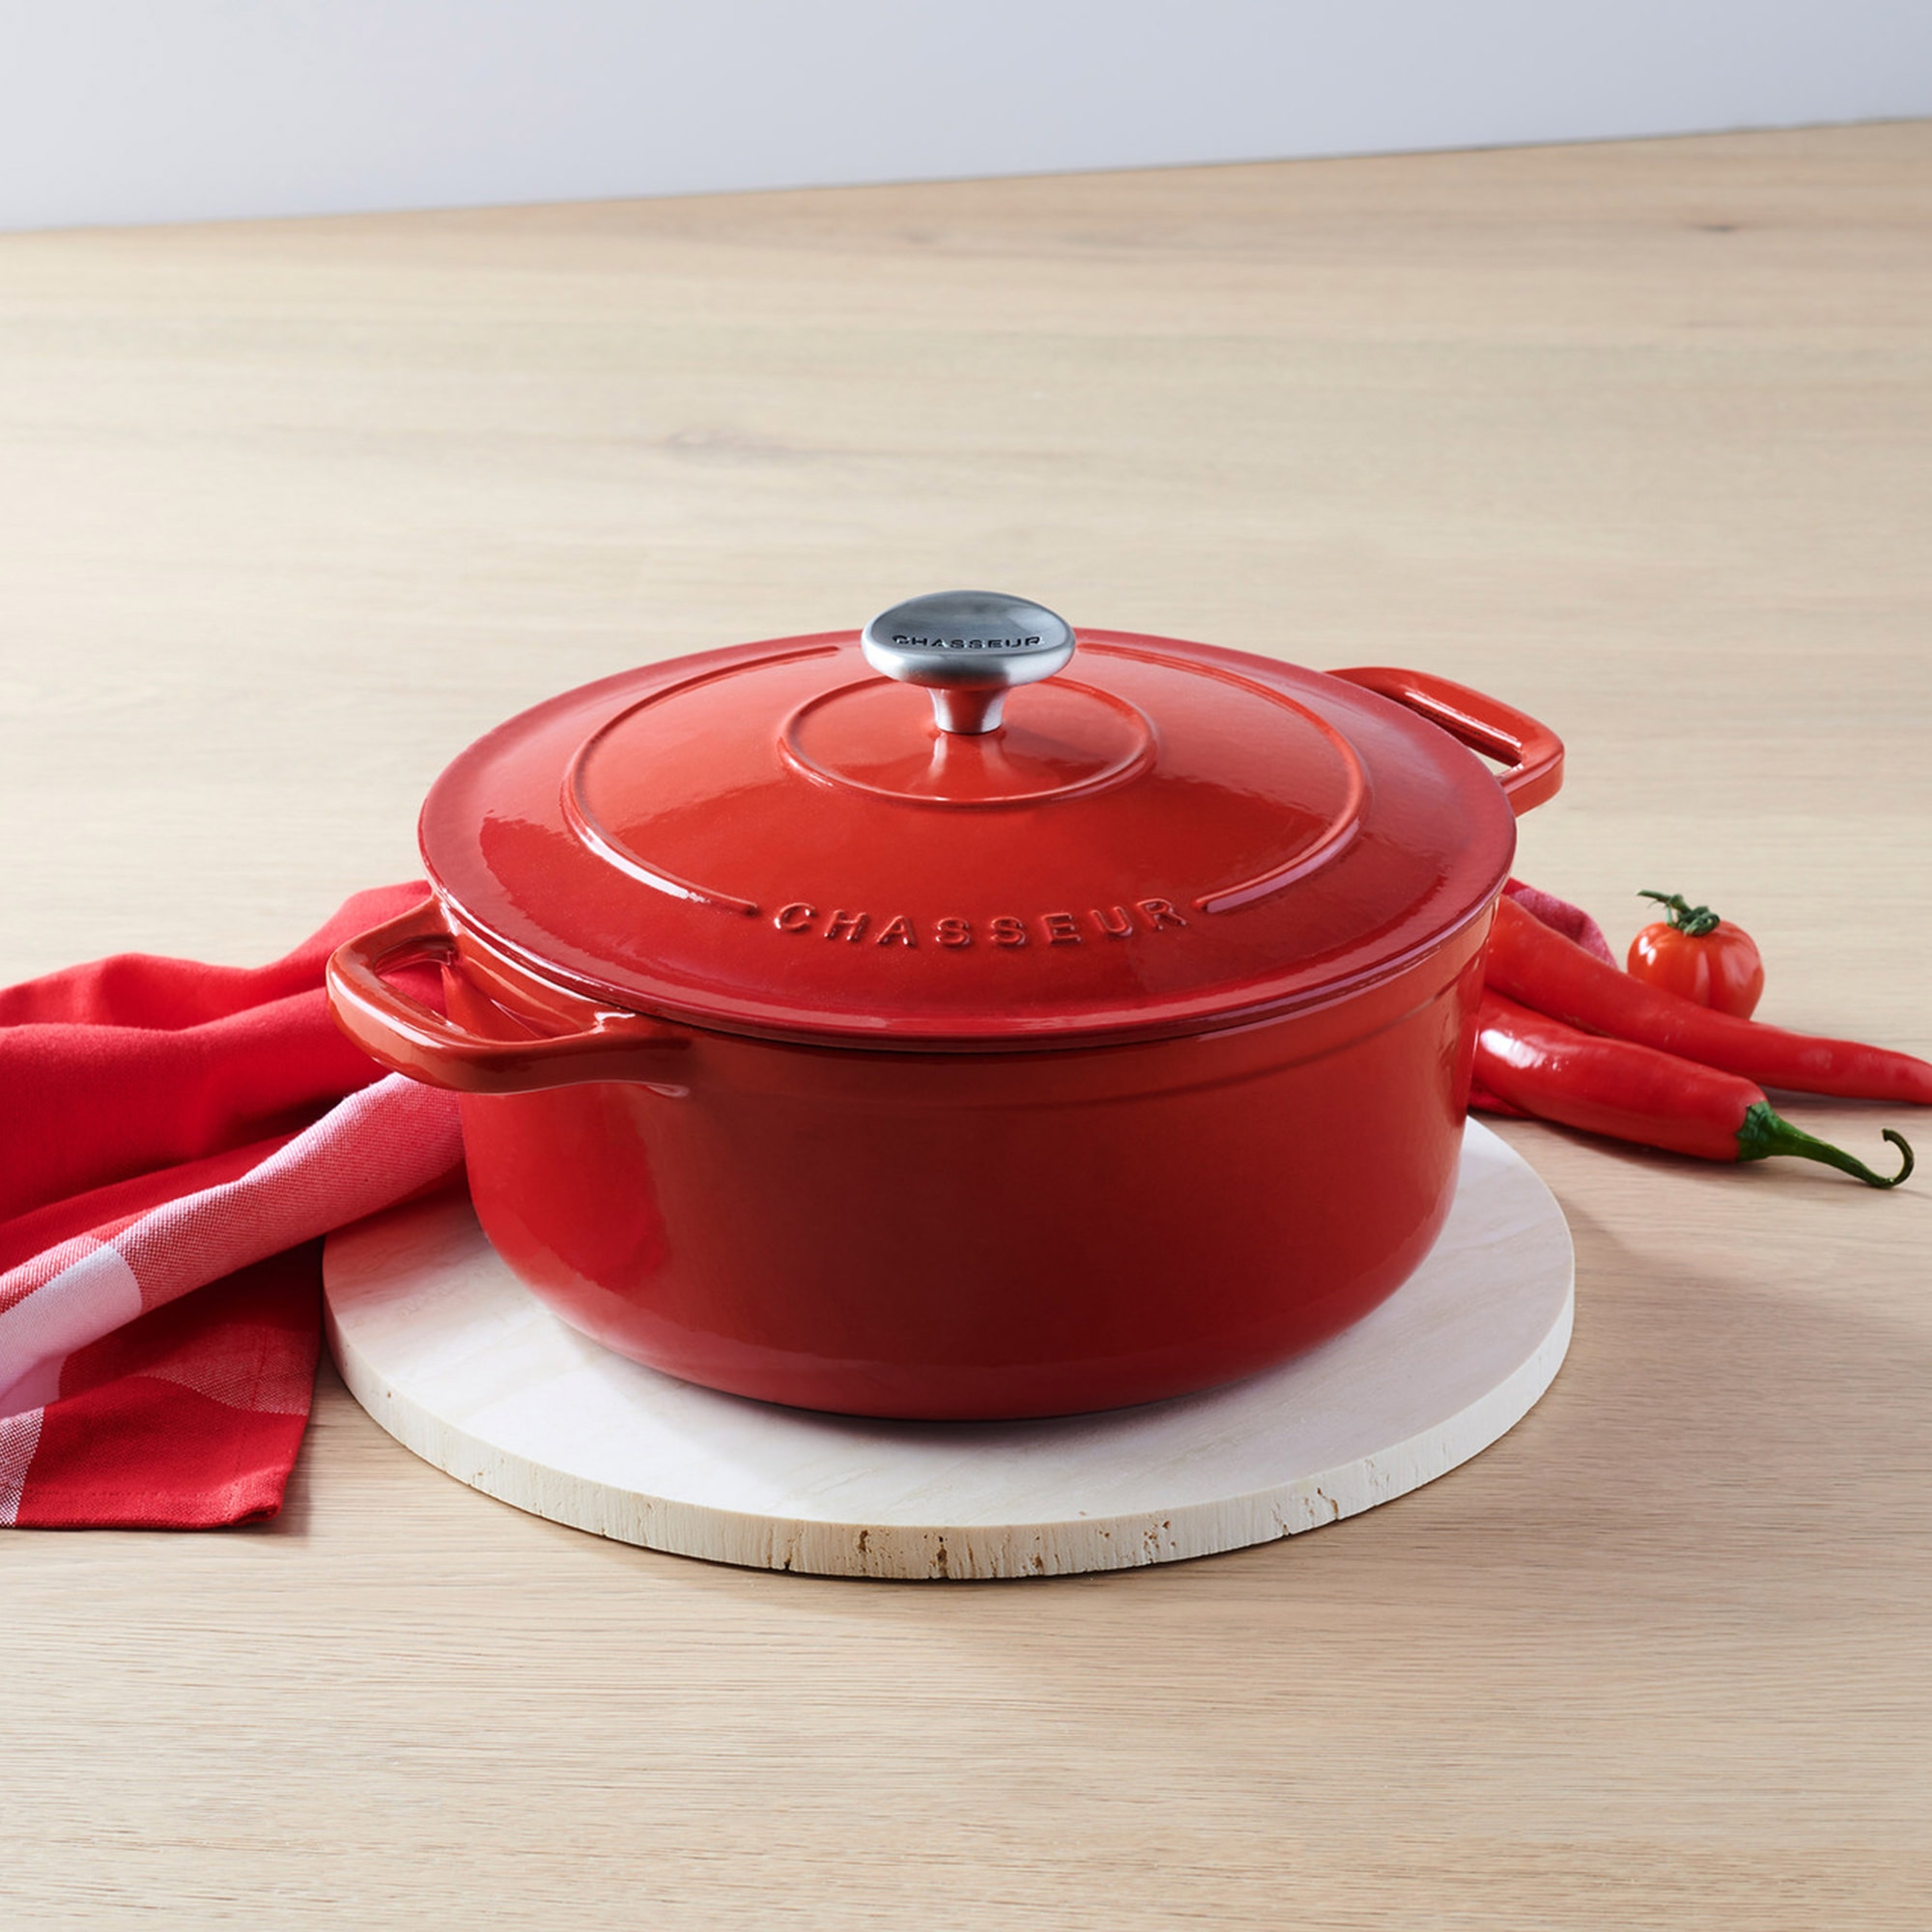 Chasseur Round French Oven 26cm - 5.2L Inferno Red Image 2